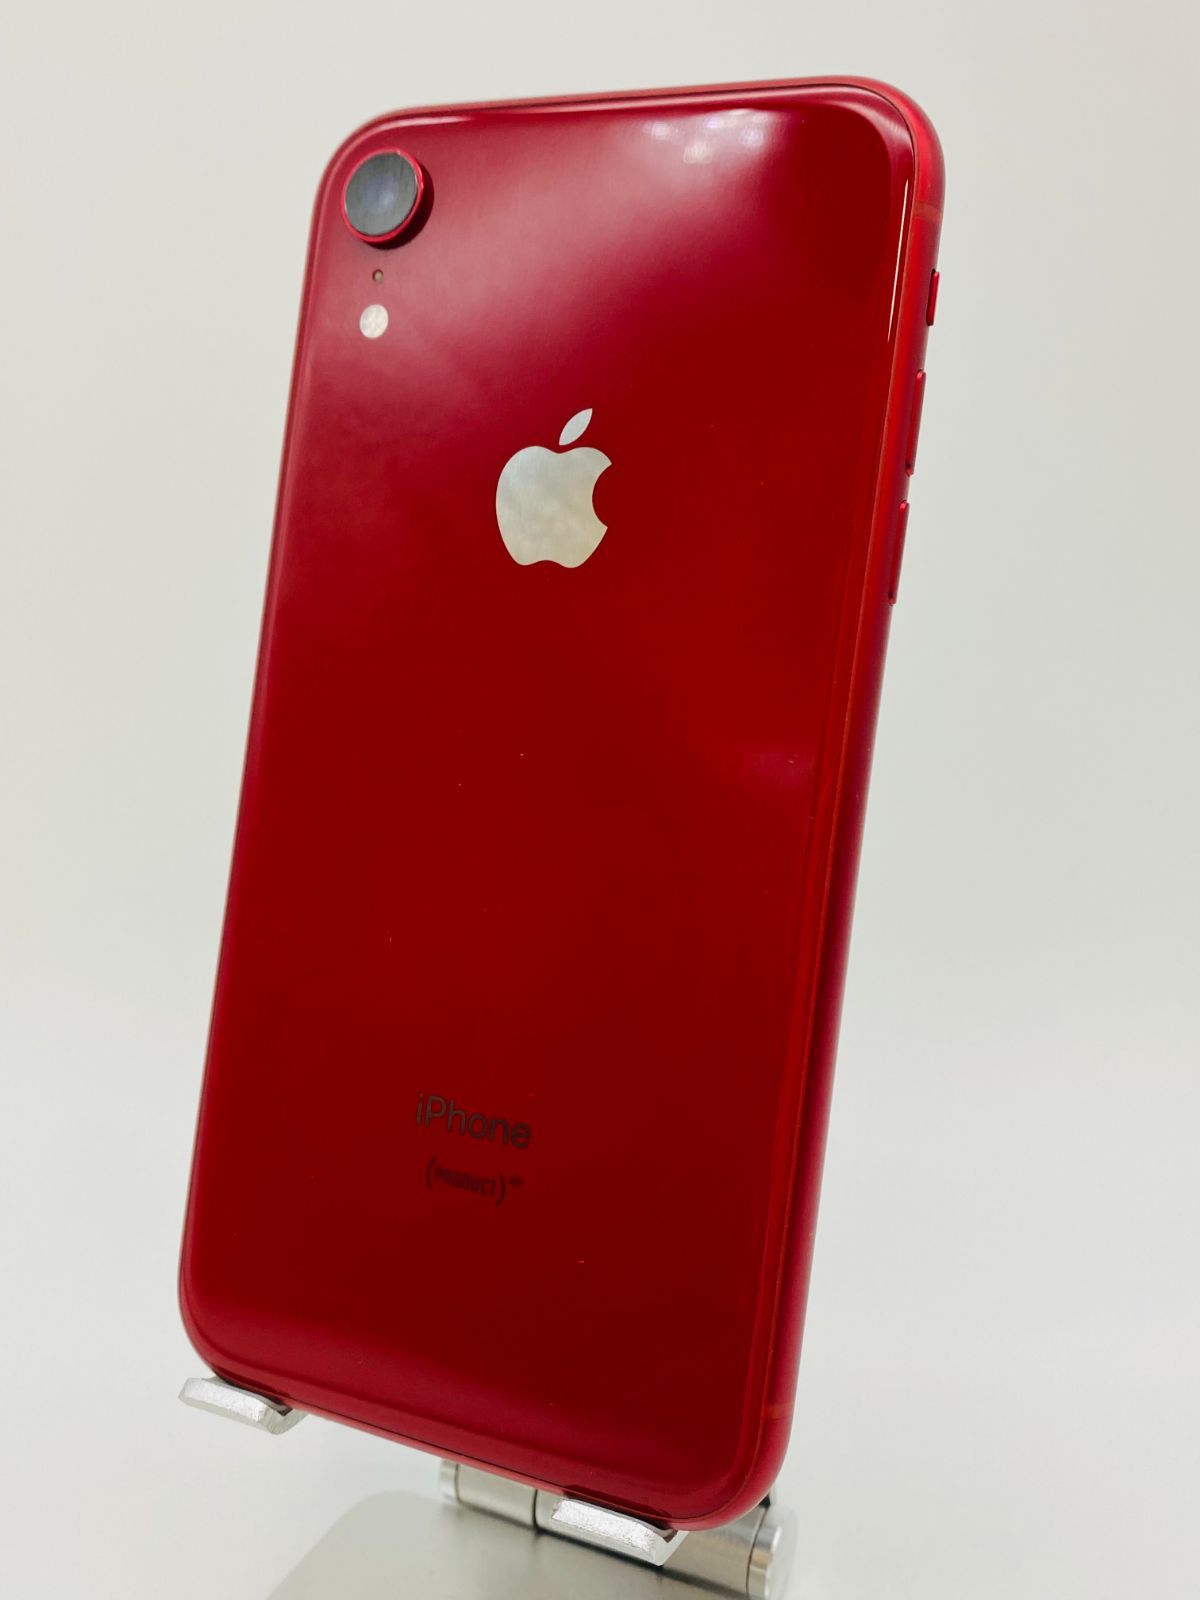 iPhone XR  64G バッテリー92%